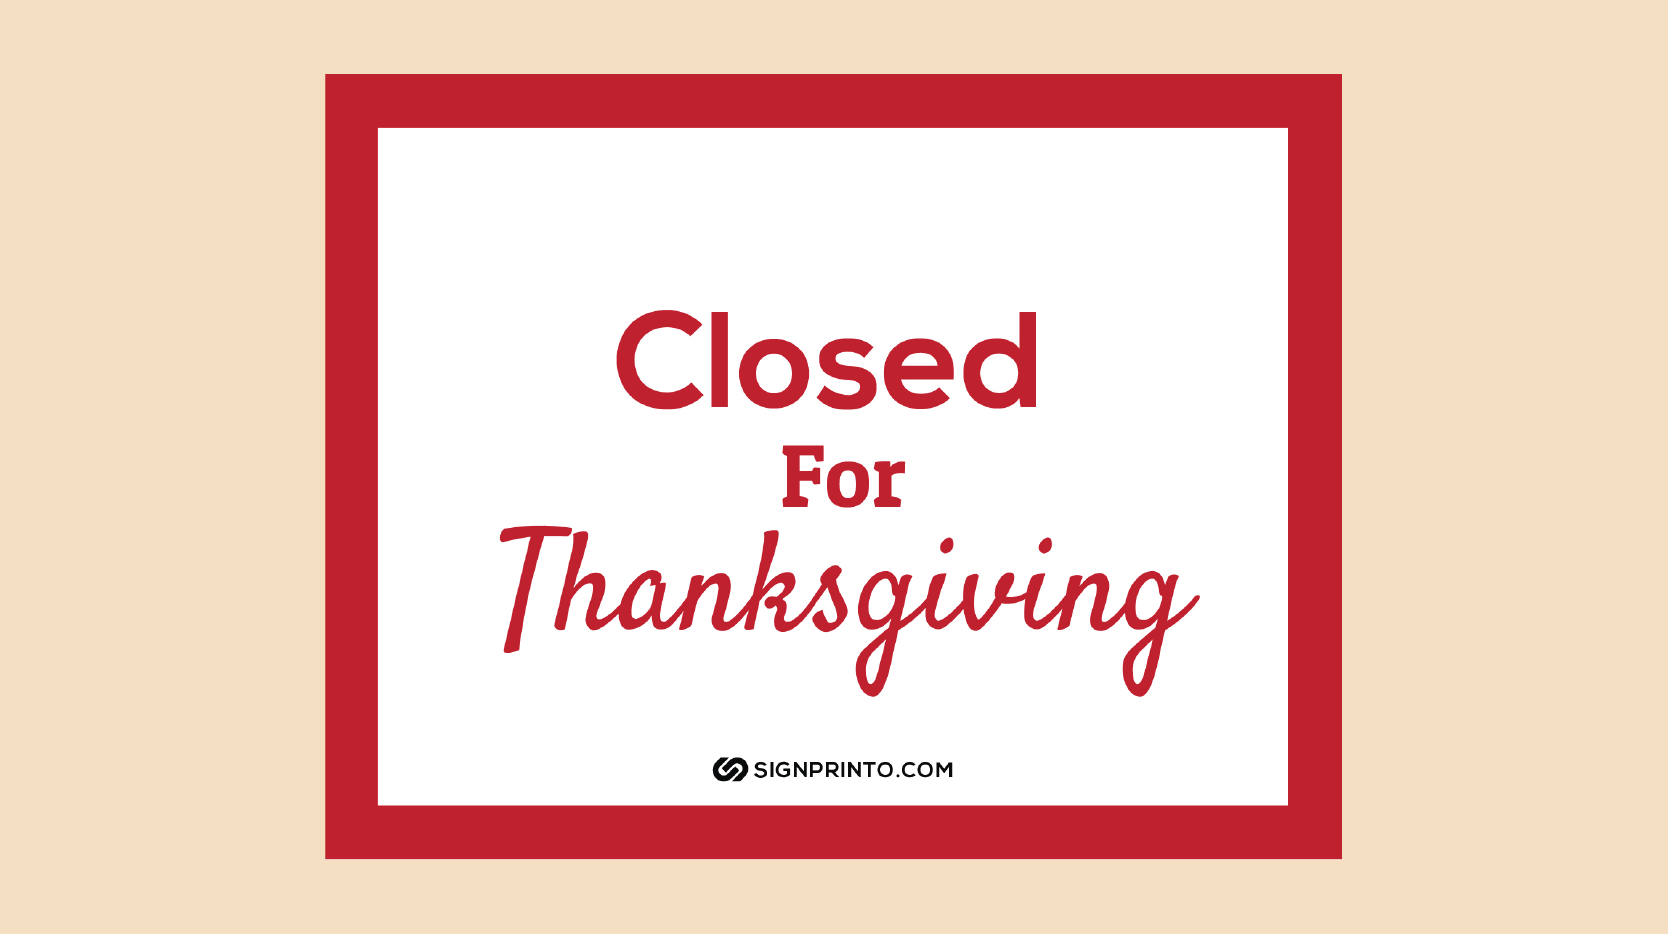 Closed for Thanksgiving Sign red